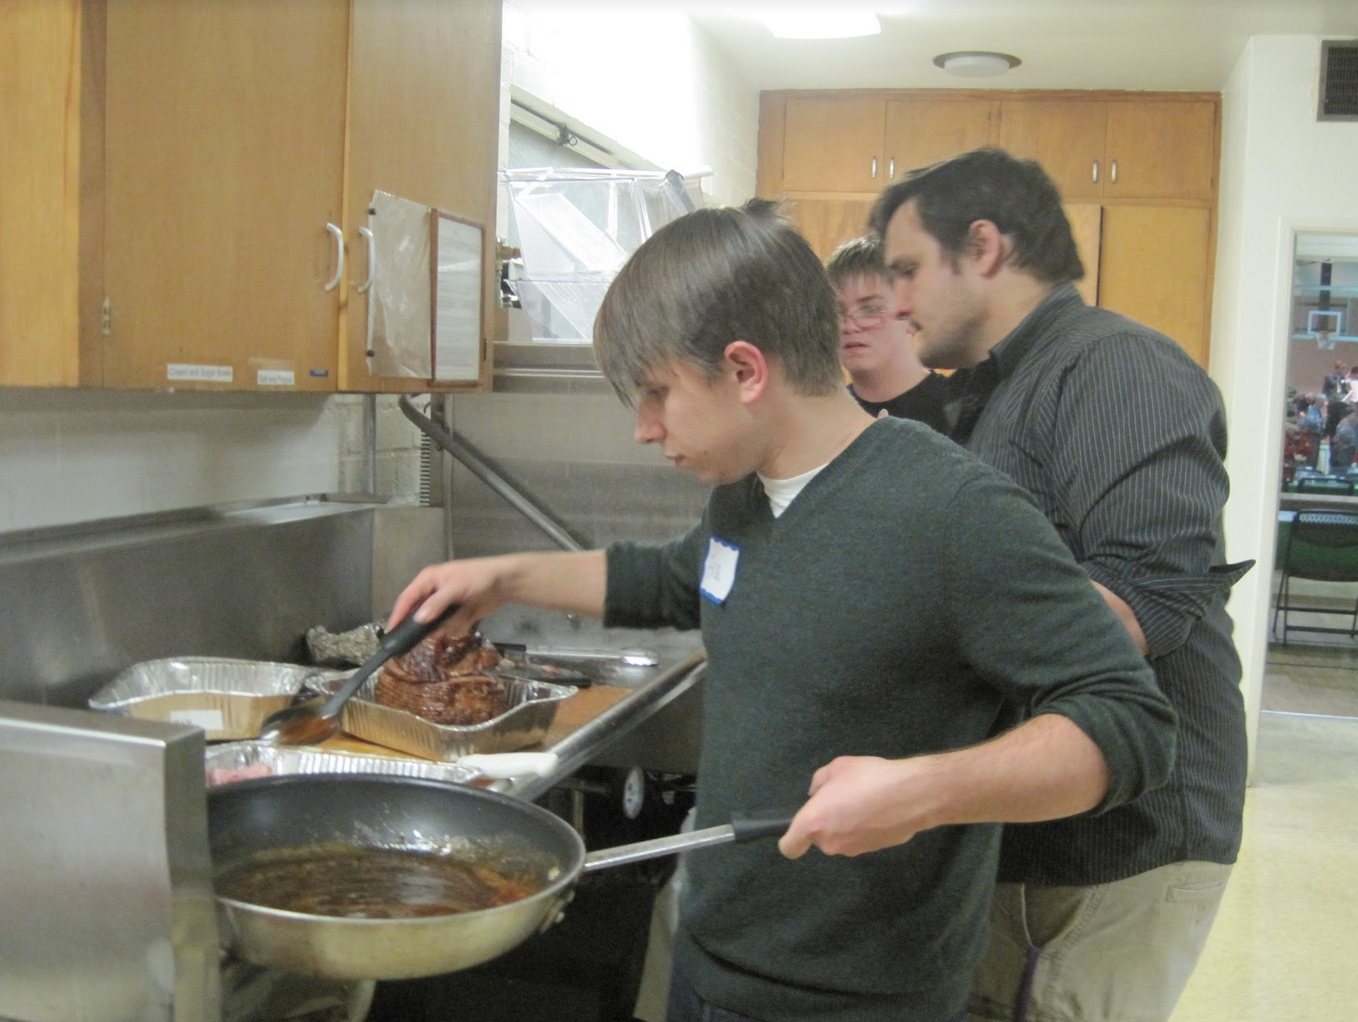 Youth serving at Bad Weather Shelter, 2014